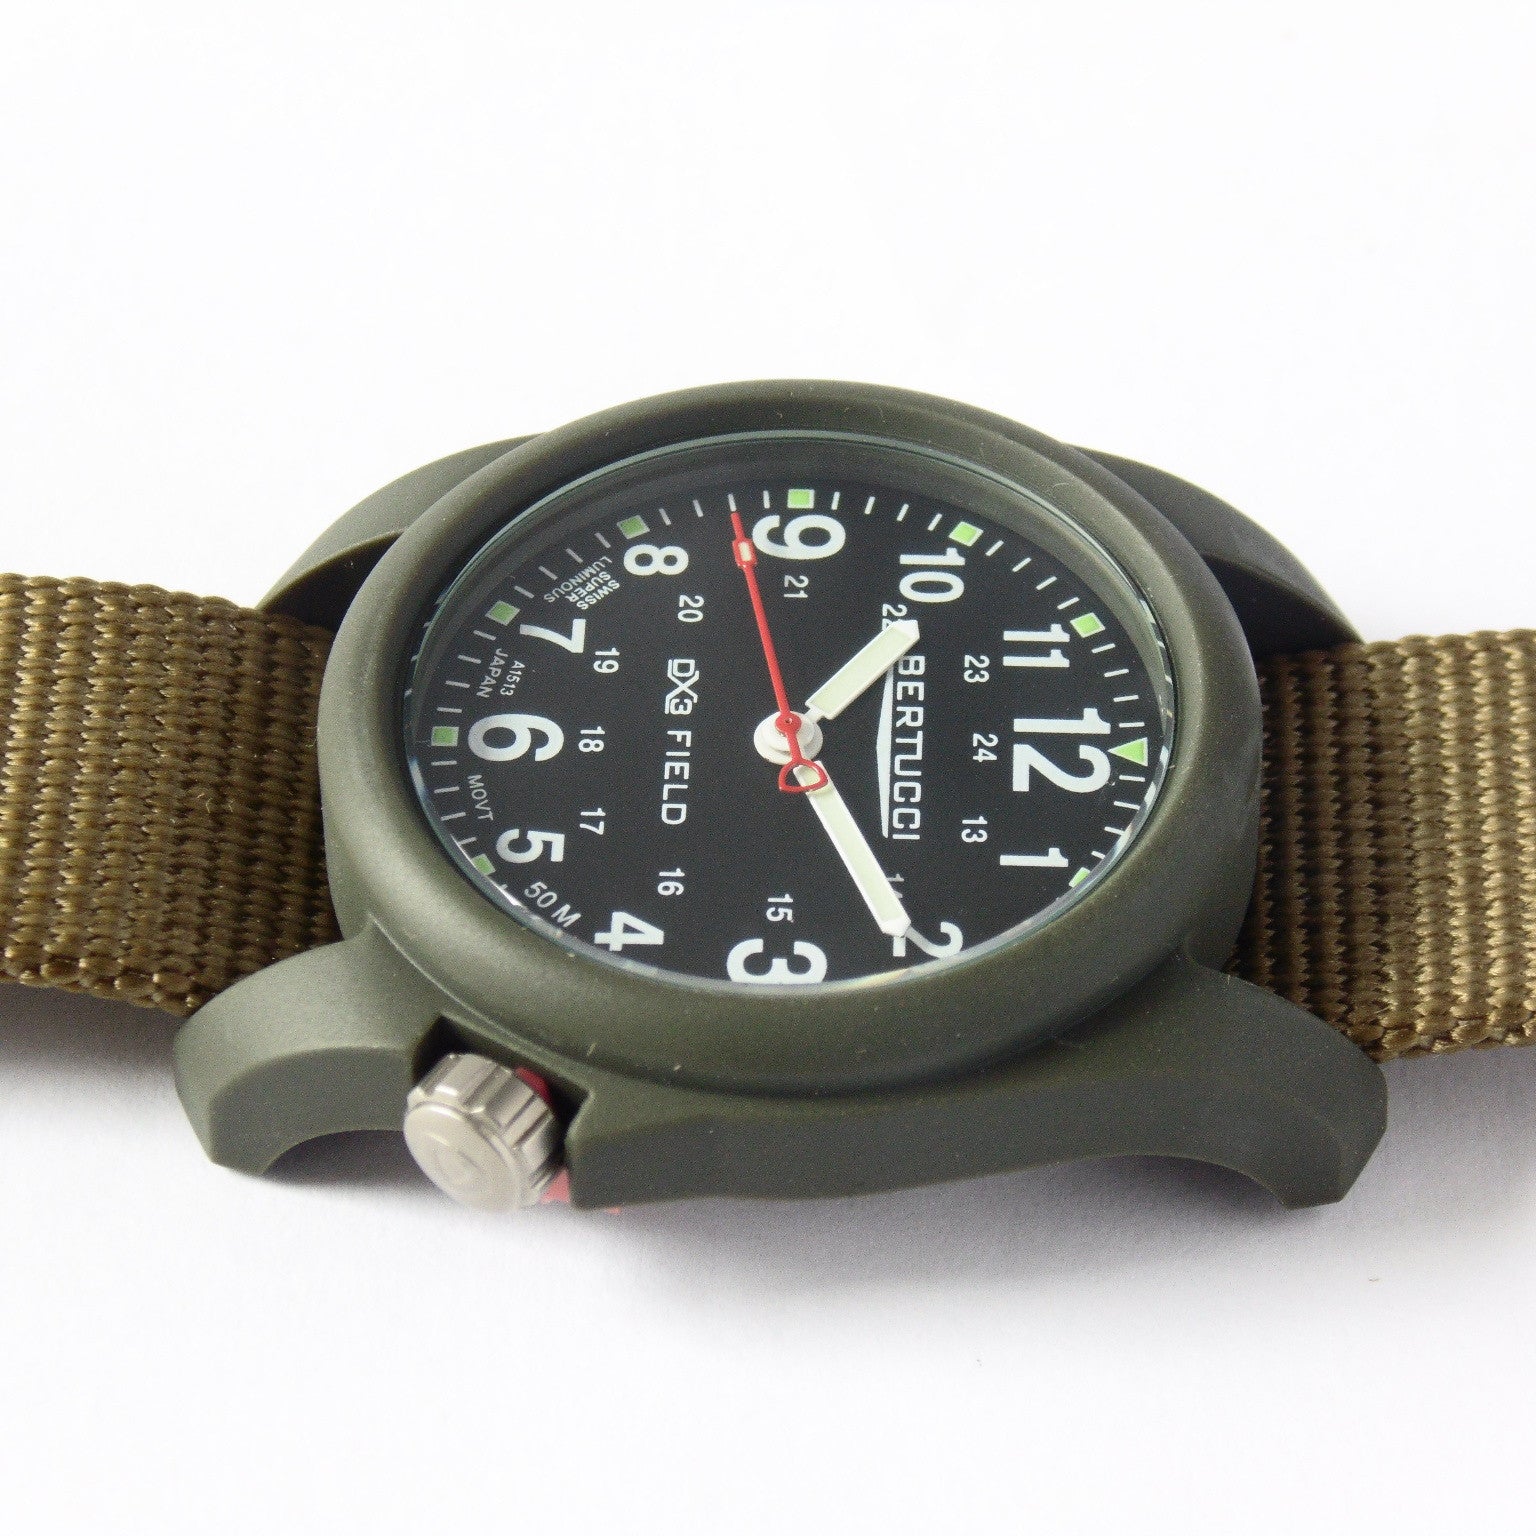 Bertucci DX3 Olive Resin Watch, Coyote Nylon Strap, Black Dial - 11027 - Watchfinder General - UK suppliers of Russian Vostok Parnis Watches MWC G10
 - 4